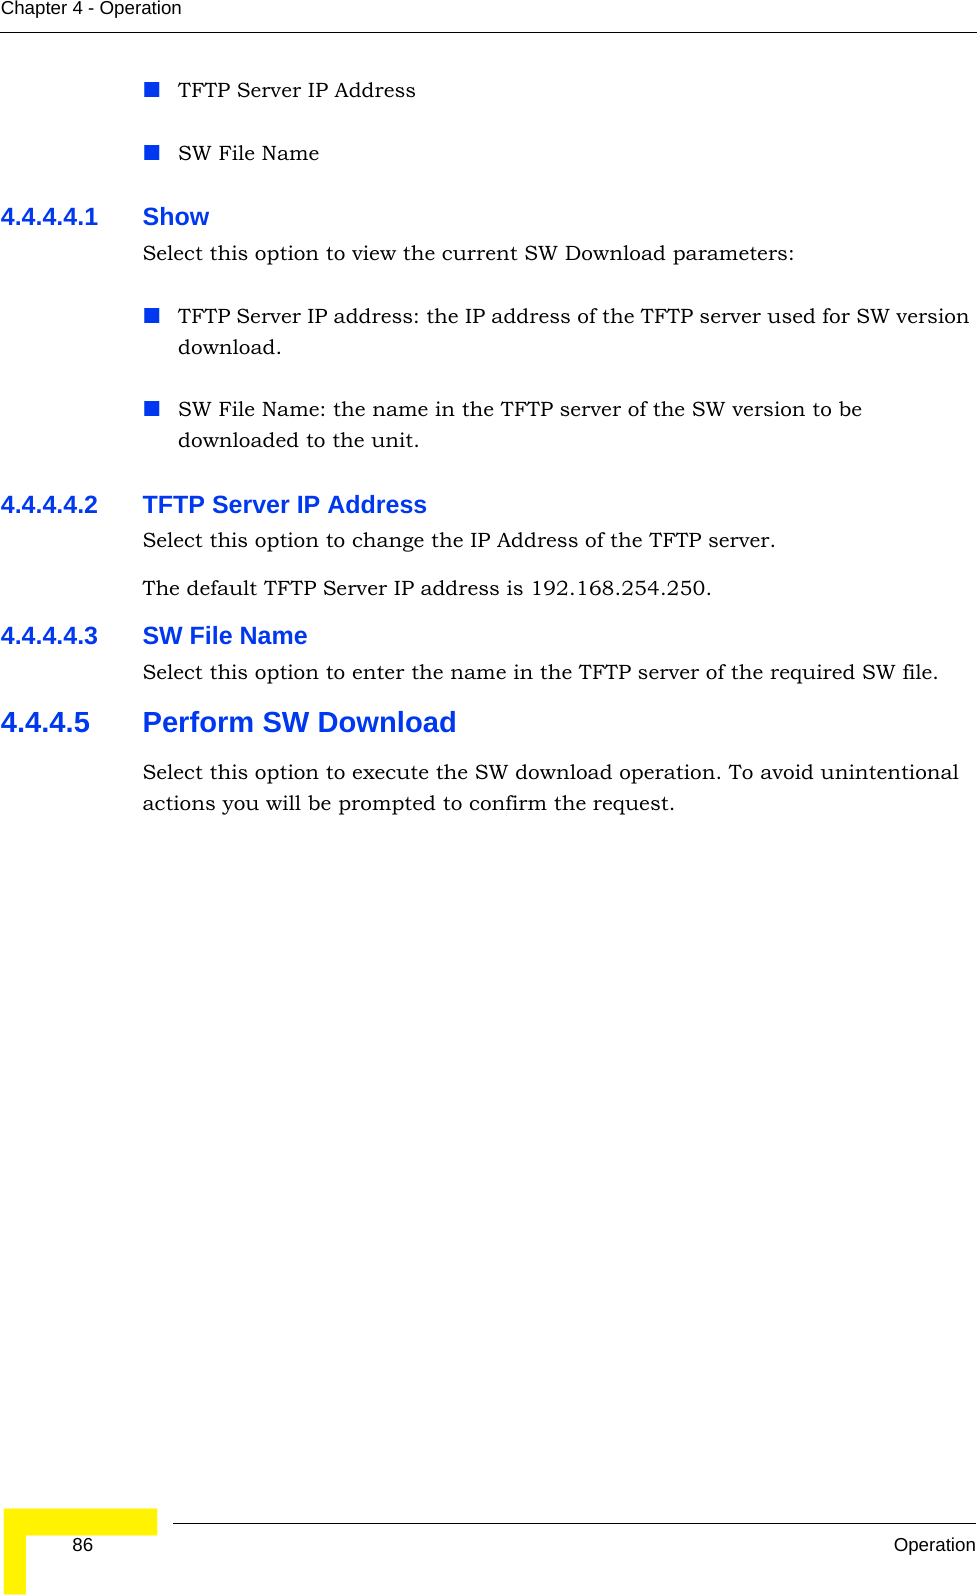  86 OperationChapter 4 - OperationTFTP Server IP AddressSW File Name4.4.4.4.1 Show Select this option to view the current SW Download parameters:TFTP Server IP address: the IP address of the TFTP server used for SW version download.SW File Name: the name in the TFTP server of the SW version to be downloaded to the unit.4.4.4.4.2 TFTP Server IP AddressSelect this option to change the IP Address of the TFTP server.The default TFTP Server IP address is 192.168.254.250.4.4.4.4.3 SW File NameSelect this option to enter the name in the TFTP server of the required SW file.4.4.4.5 Perform SW DownloadSelect this option to execute the SW download operation. To avoid unintentional actions you will be prompted to confirm the request.